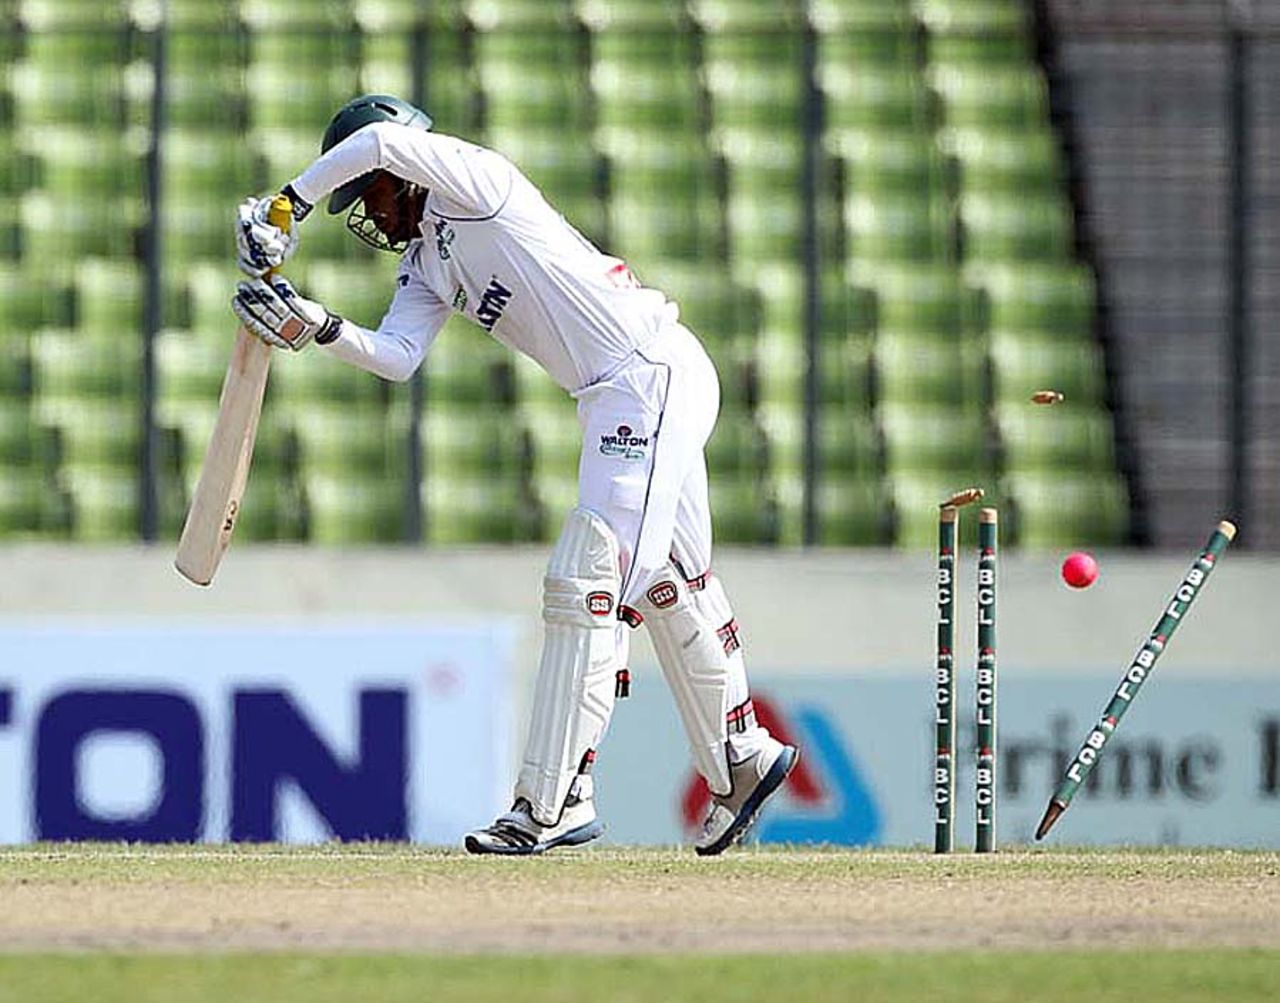 Shamsur Rahman was bowled for 20, North Zone v Central Zone, Final, Bangladesh Cricket League 2012-13, Mirpur, February 22, 2013